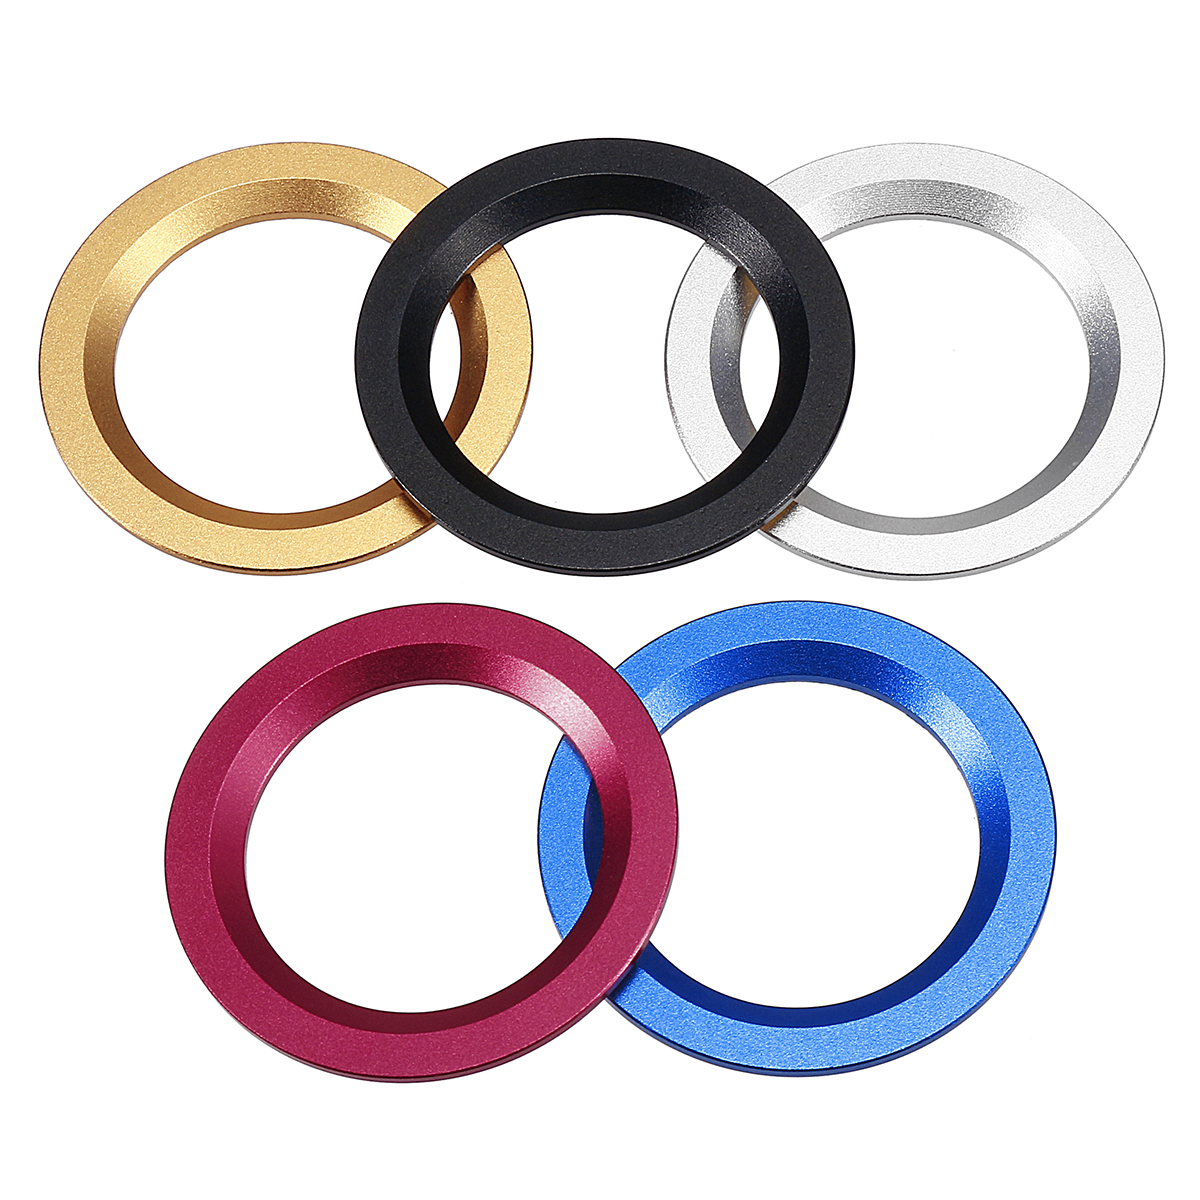 1Pcs Engine Start Button Cover Cap Decor Ring Trim Aluminum Alloy for Toyota/Ford/Cadillac